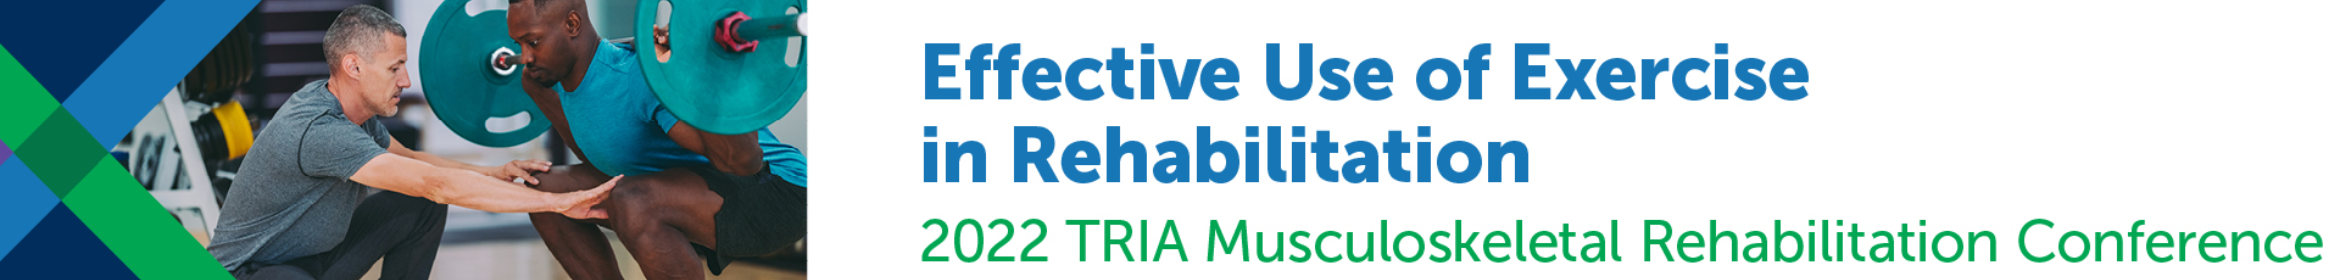 TRIA Musculoskeletal Rehabilitation Conference 2022 Main banner